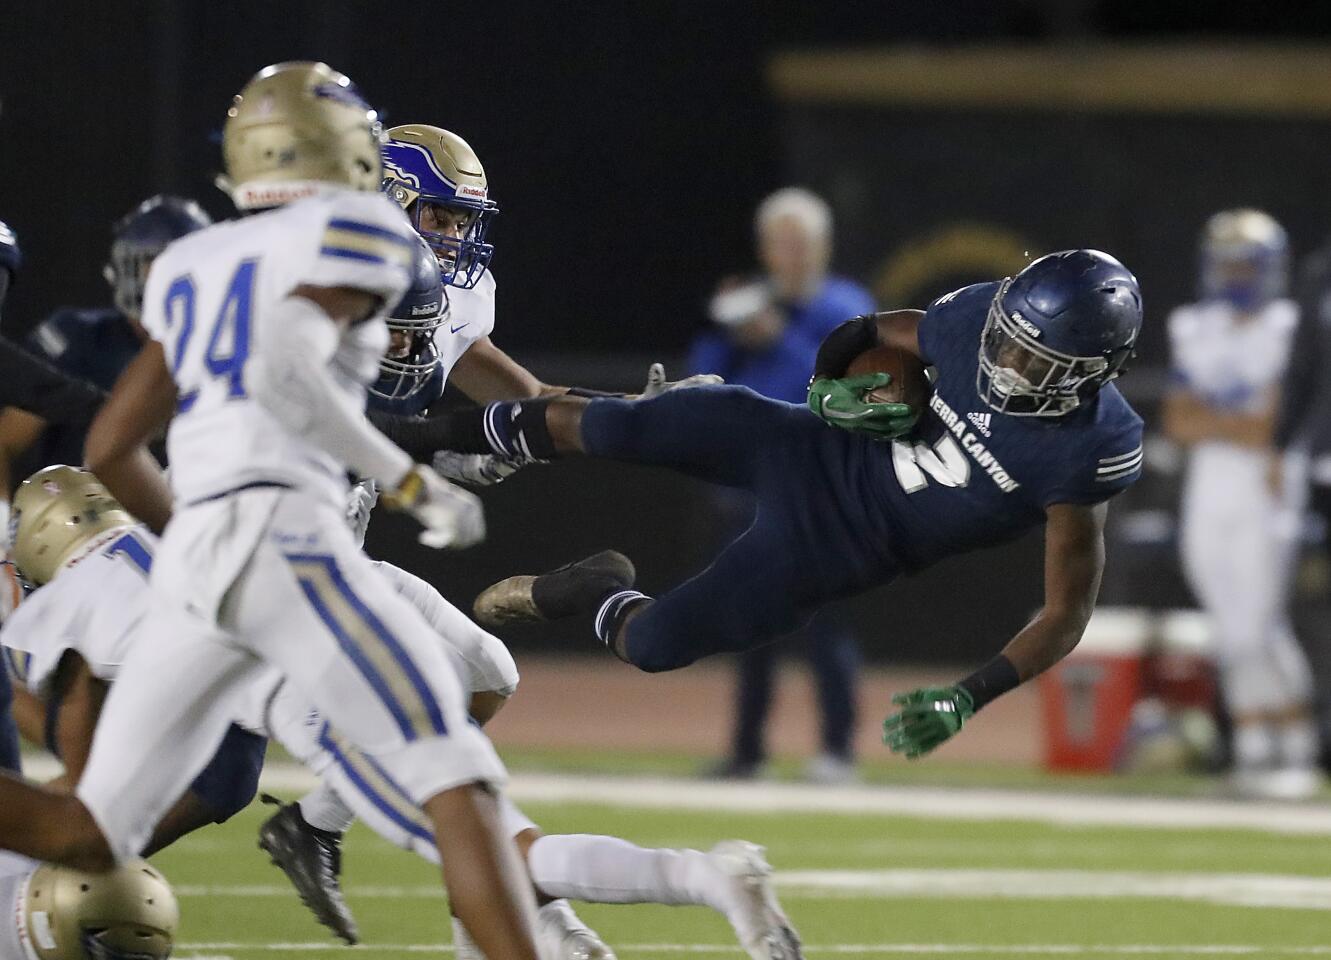 Sierra Canyon's DJ Harvey gets airborne after a catch-and-run play against Santa Margarita.